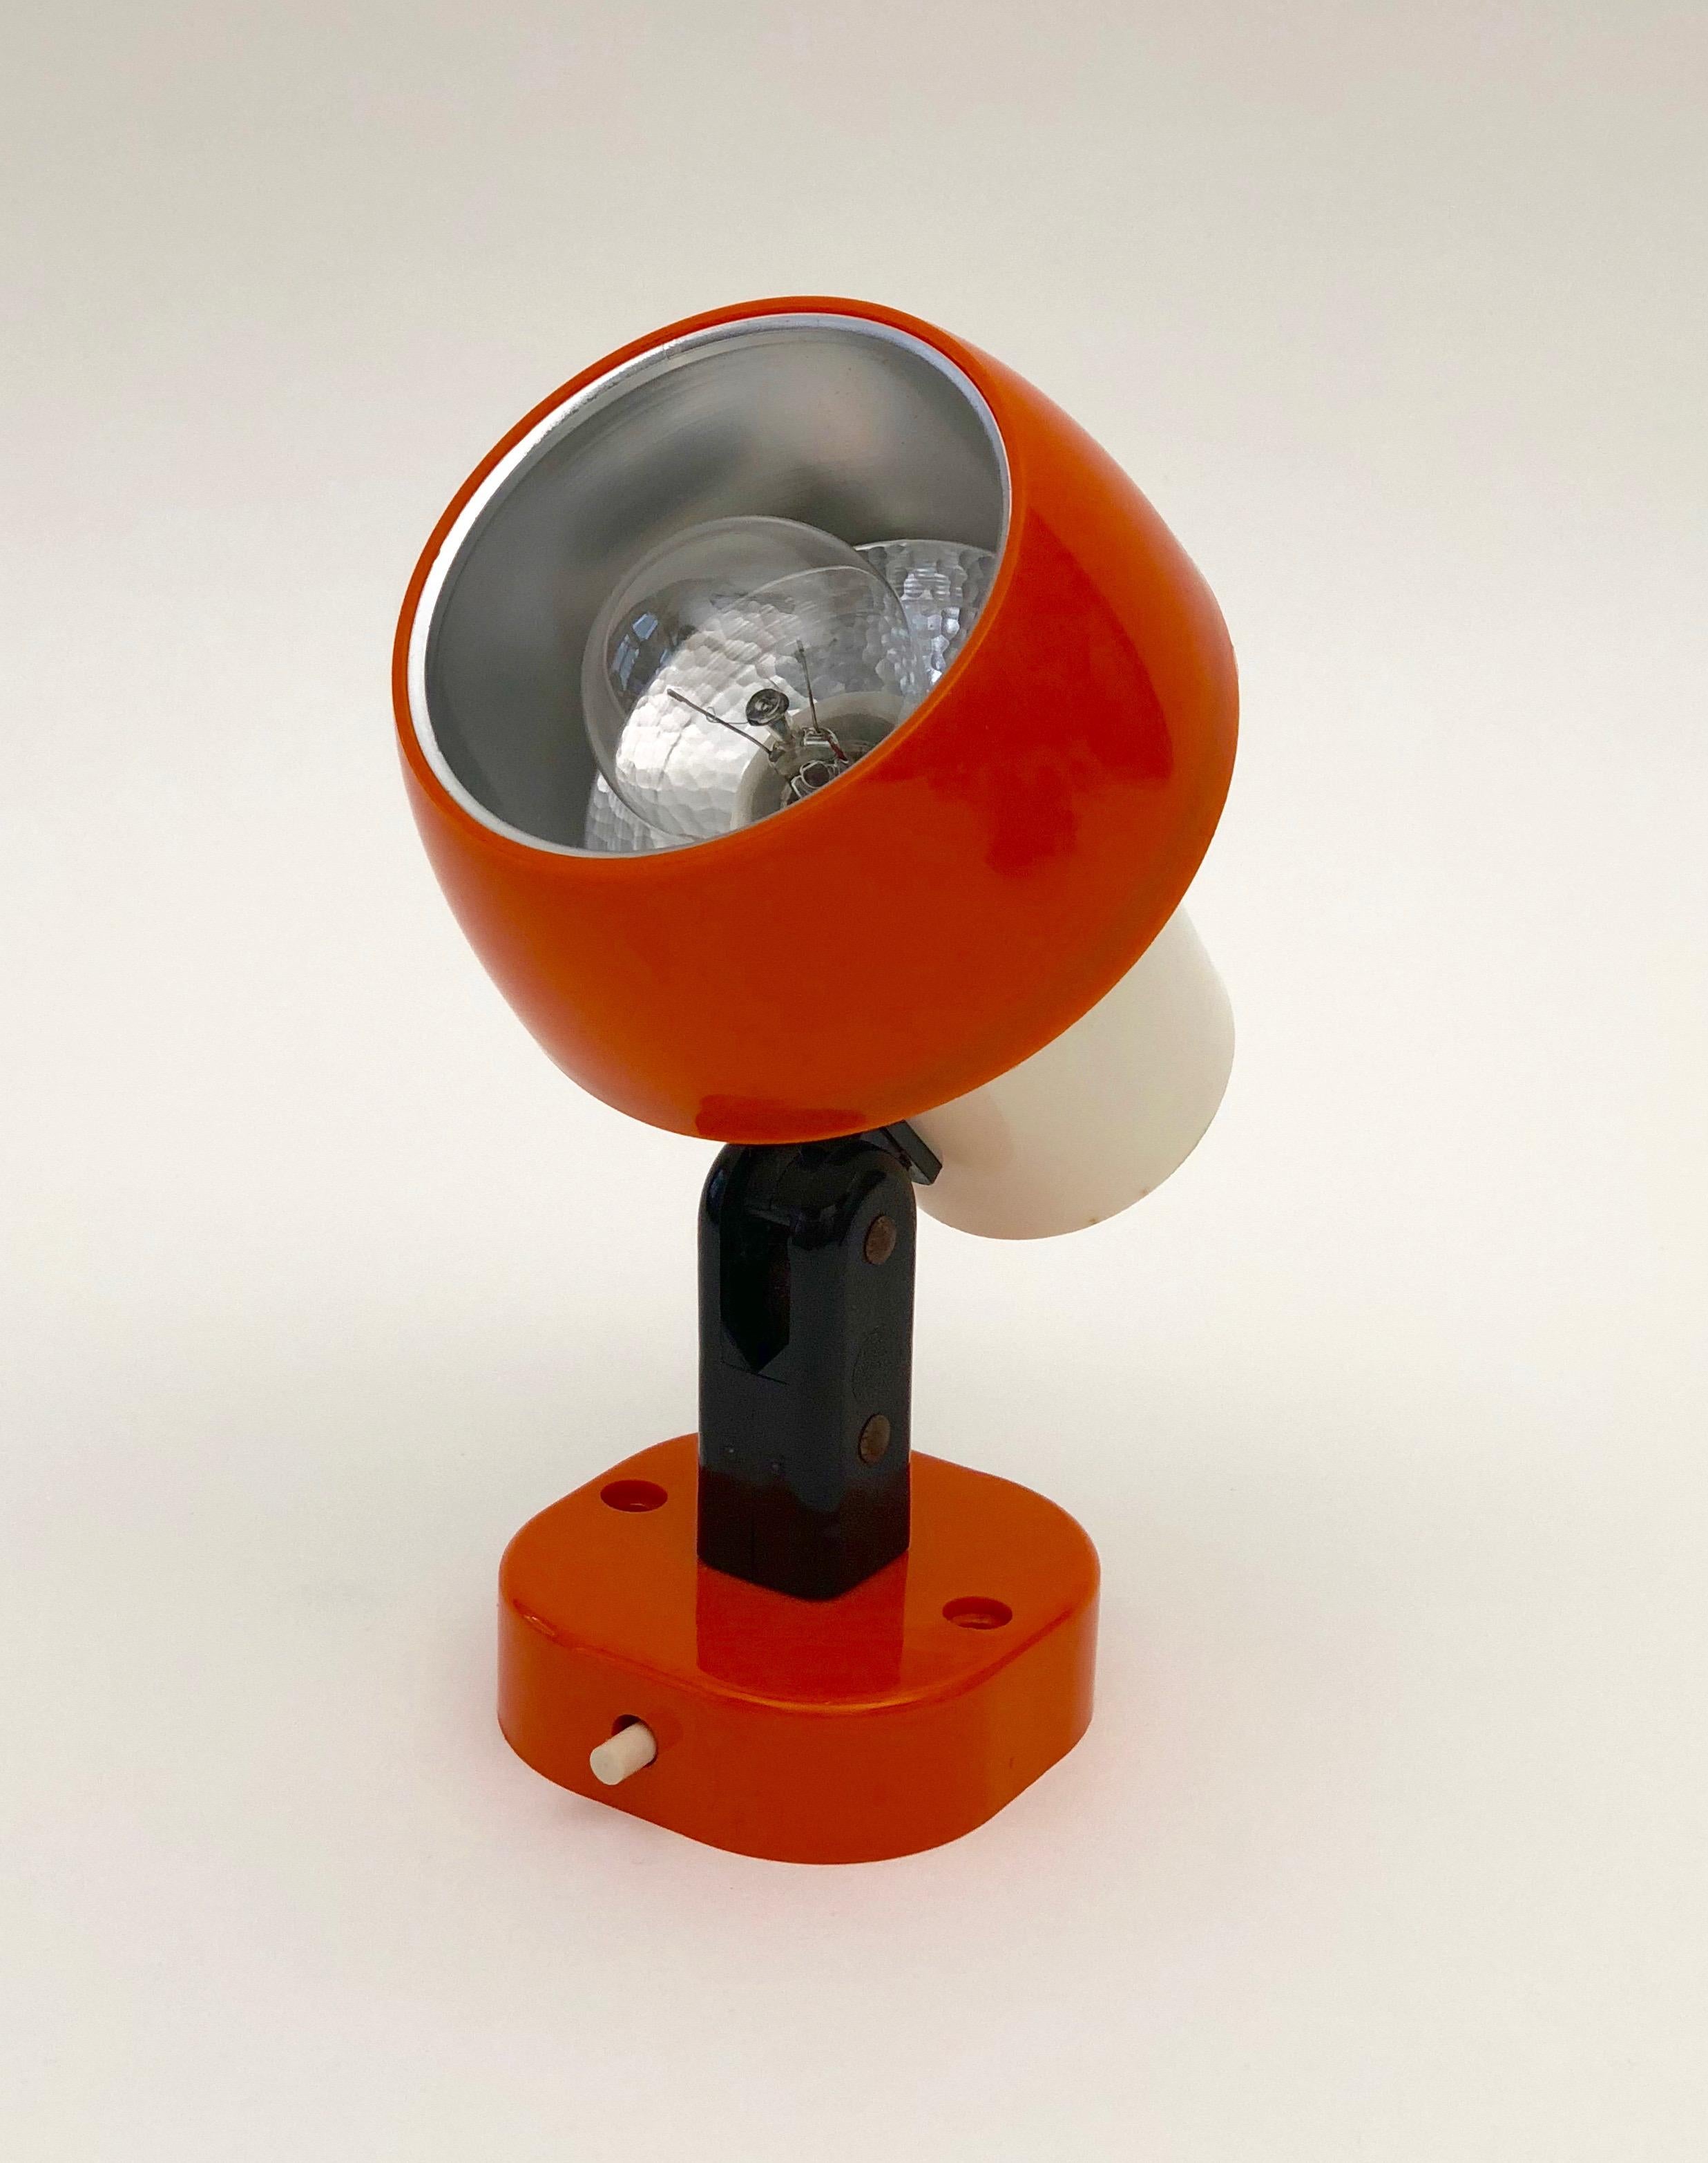 Small adjustable wall lamp made from ABS plastic with metal diffuser. The colors: cream, orange and black are combined with details,
such as industrial mounting bolts and a minimalistic switch. Maximum bulb is 40 watts.